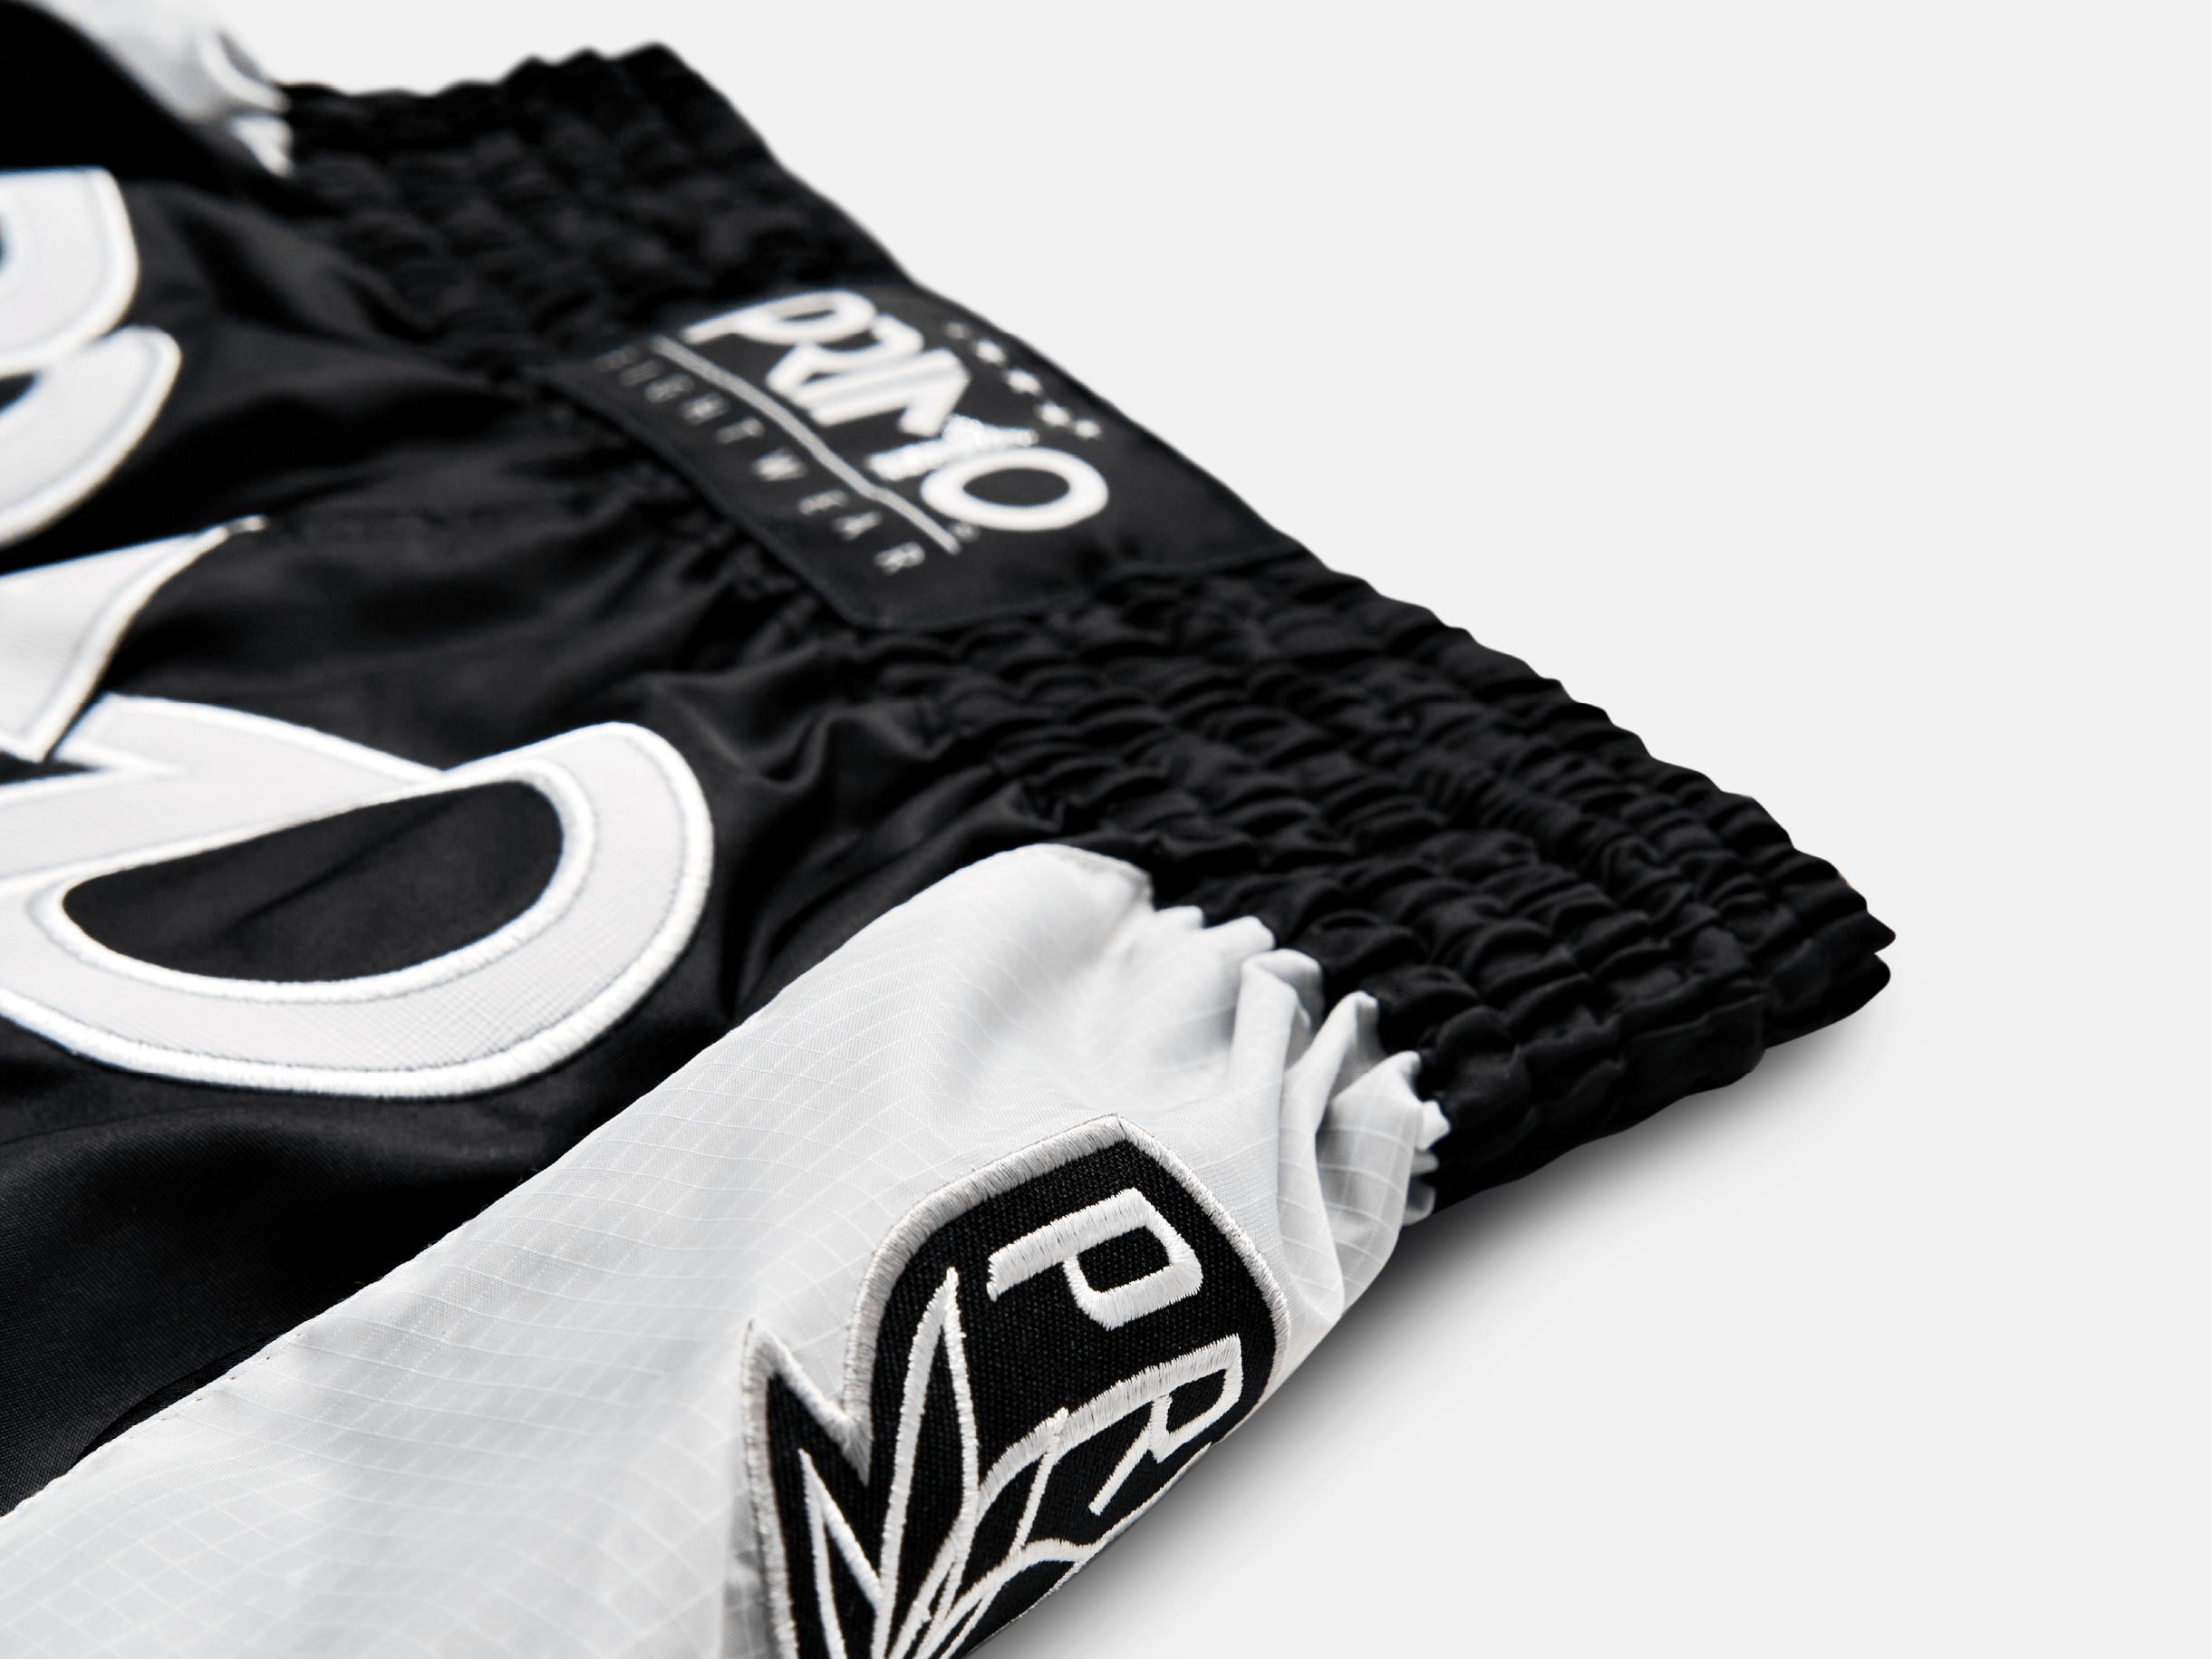 Primo Fight Wear Official Muay Thai Shorts - Free Flow Series - Off Wai